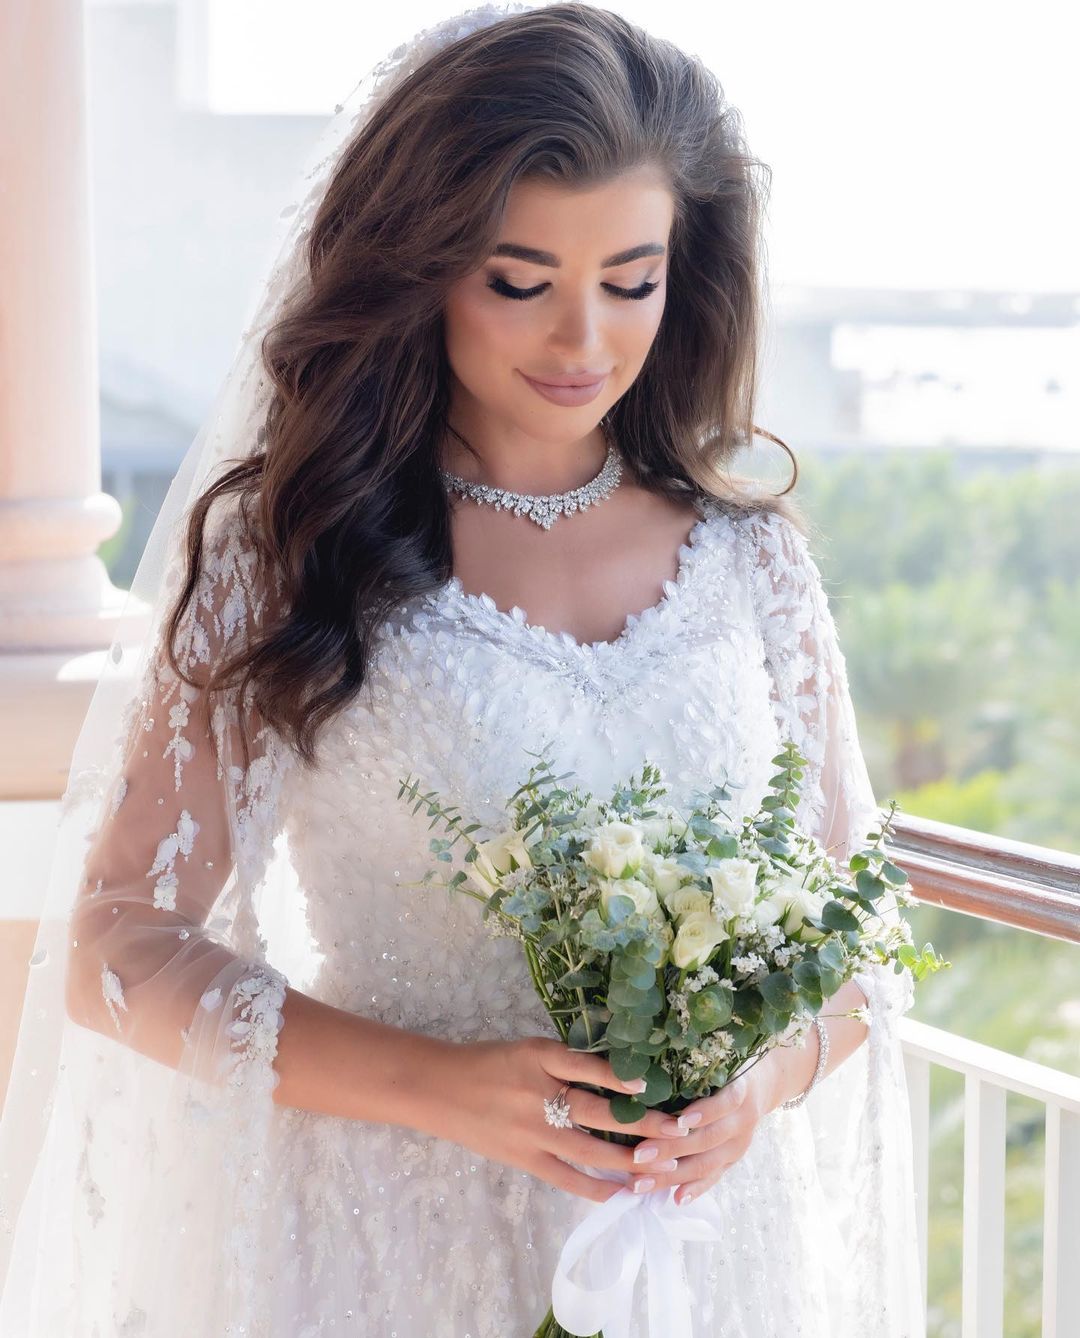 Our picks of best Arab Wedding Gowns - Get Inspiring Ideas for Planning ...